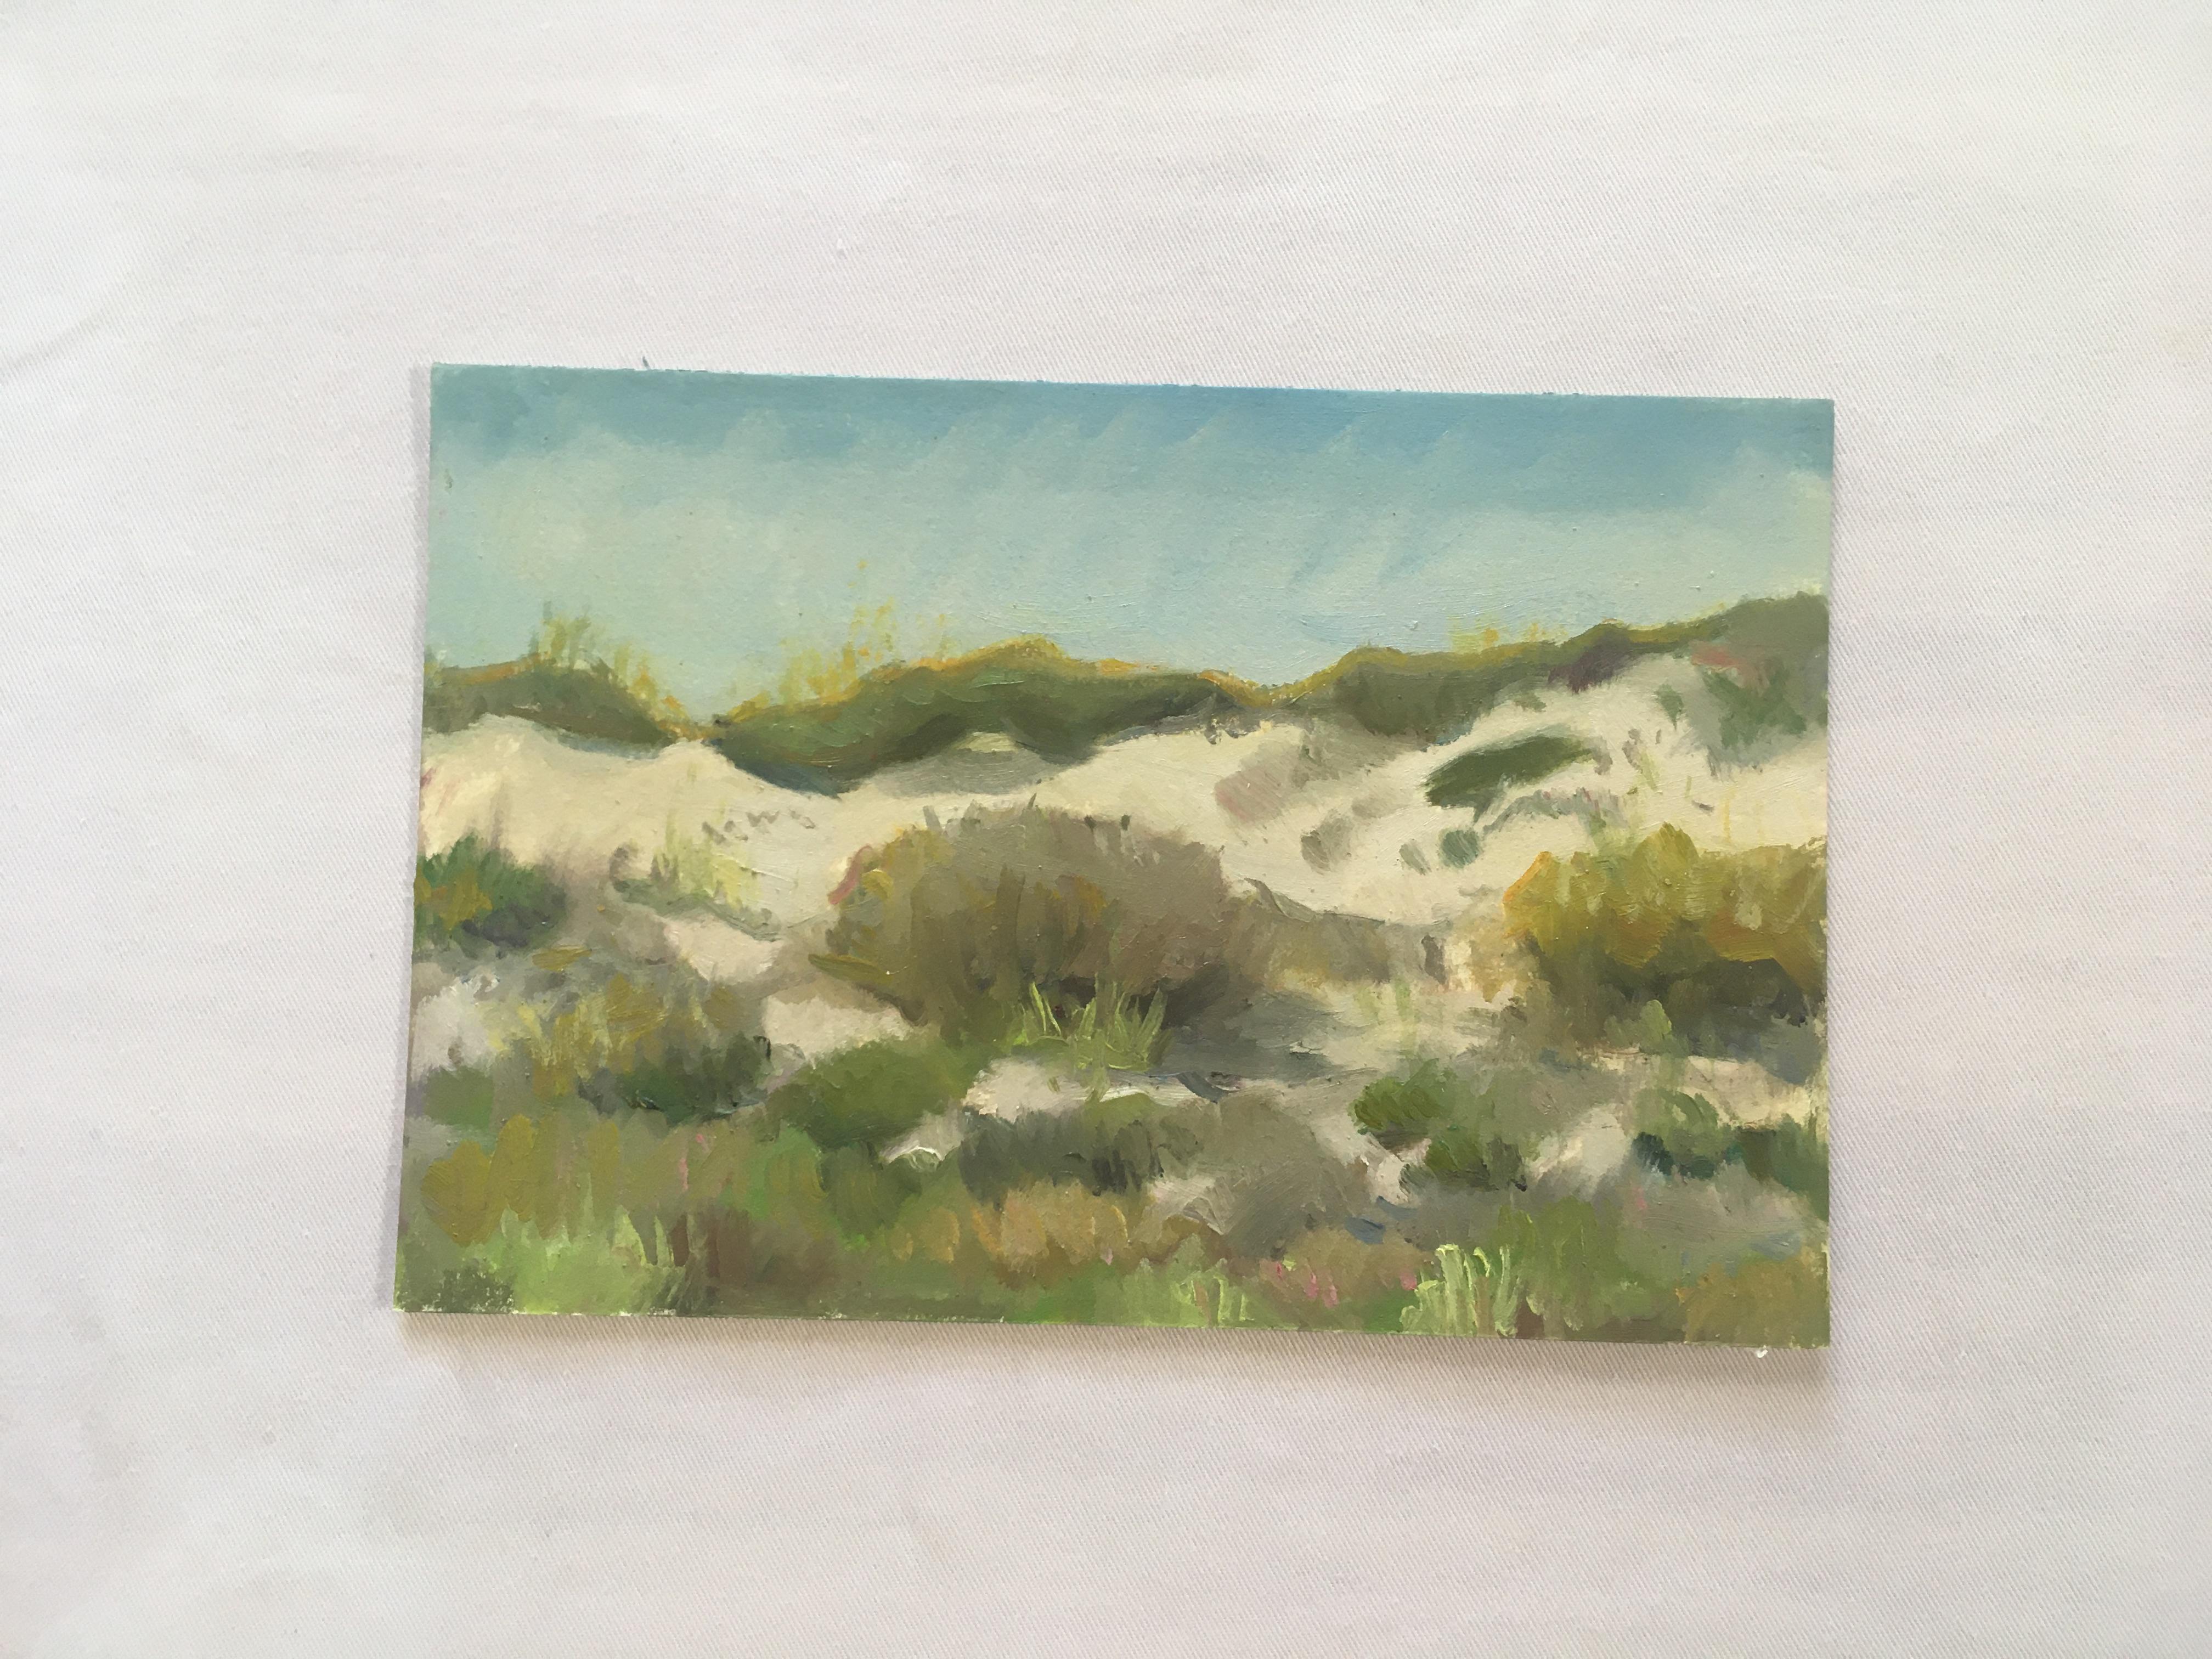 DUNES - Landscape Painting of Sand, Reeds, & Sky - Oil on Arches Oil Paper - Art by Amanda Joy Brown